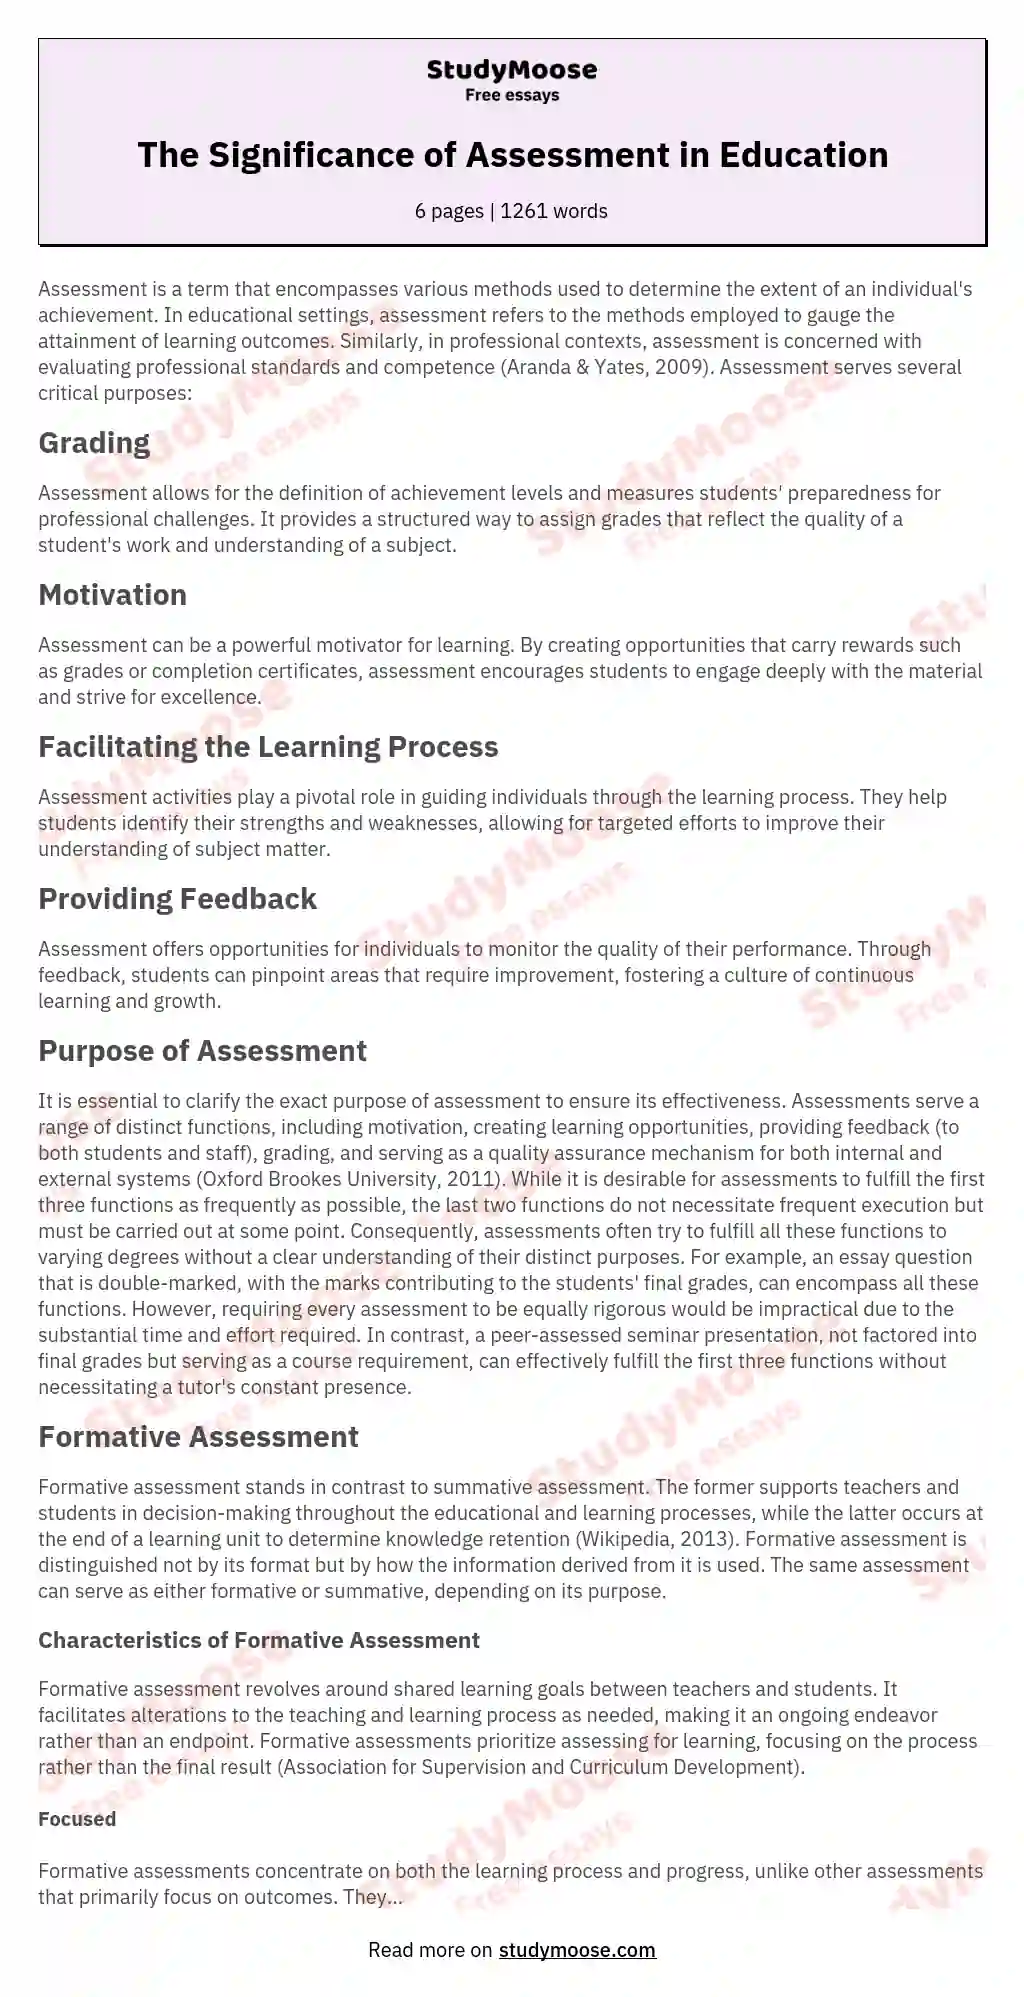 Forms of Assessment and Summative Assessment in Education